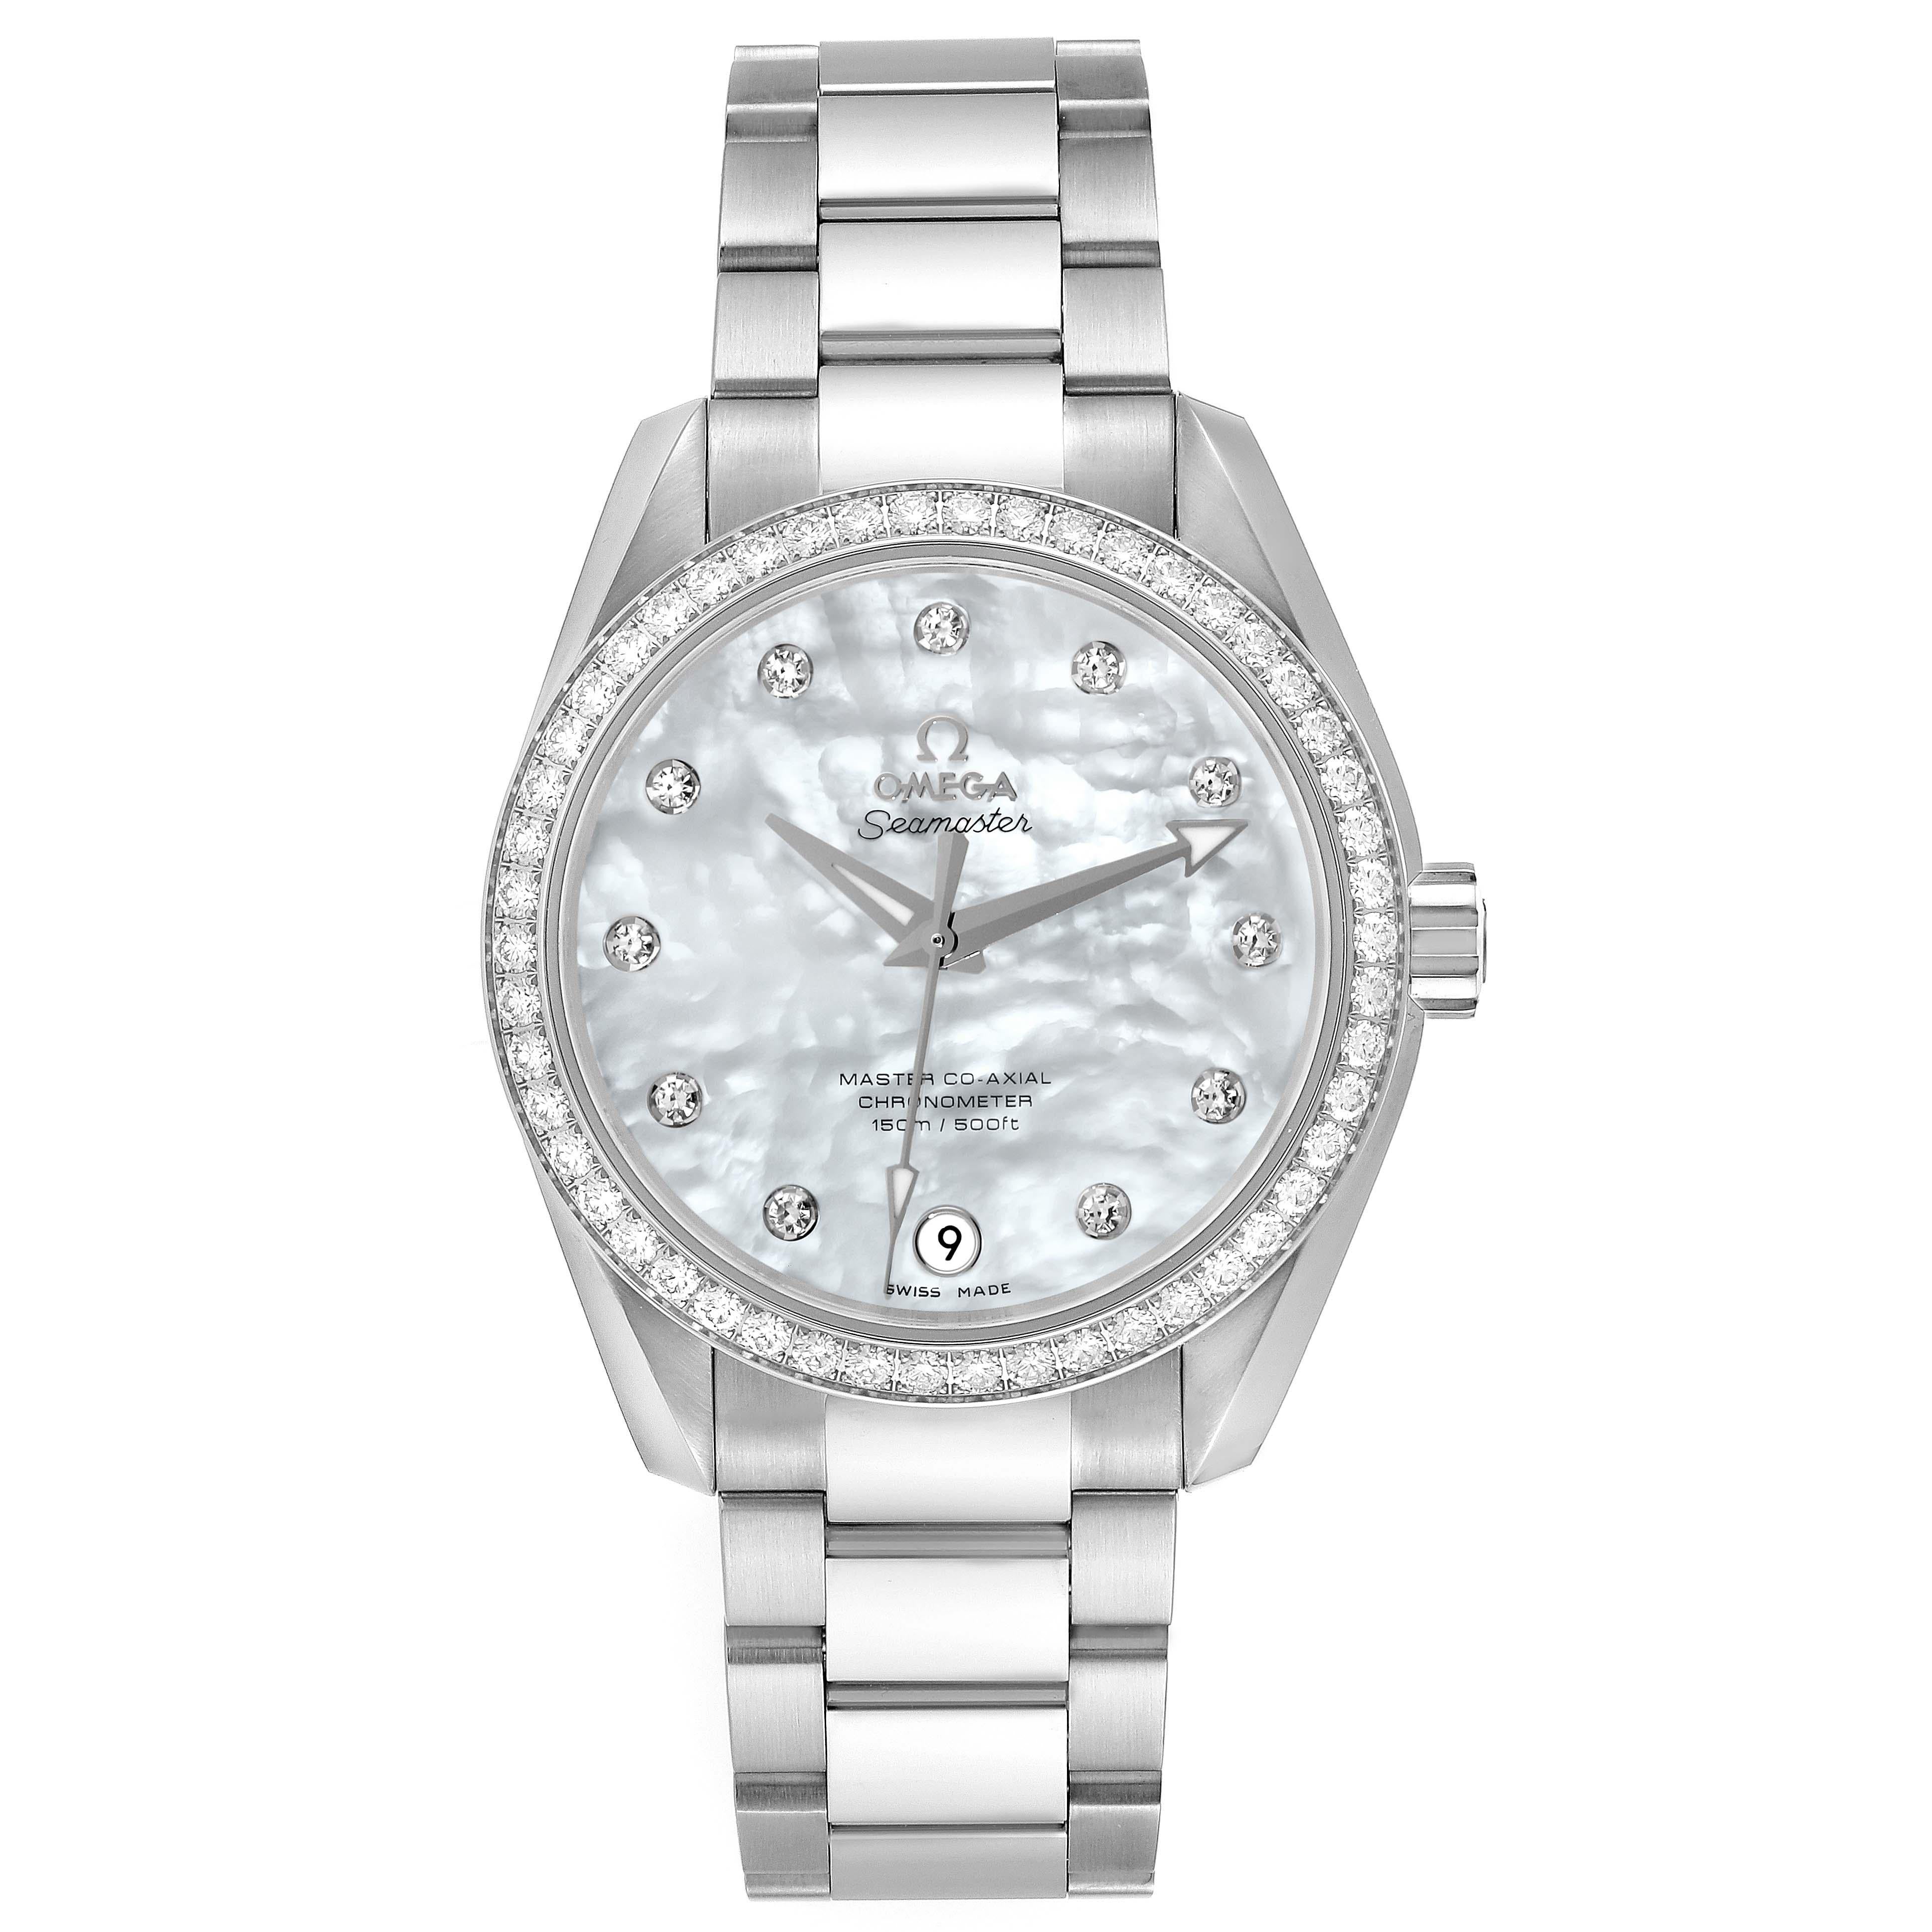 Omega Aqua Terra Mother Of Pearl Dial Diamond Steel Ladies Watch 231.15.39.21.55.001 Unworn. Automatic self-winding movement. Stainless steel round case 38.5 mm in diameter. Exhibition transparent sapphire crystal caseback. Stainless steel bezel set